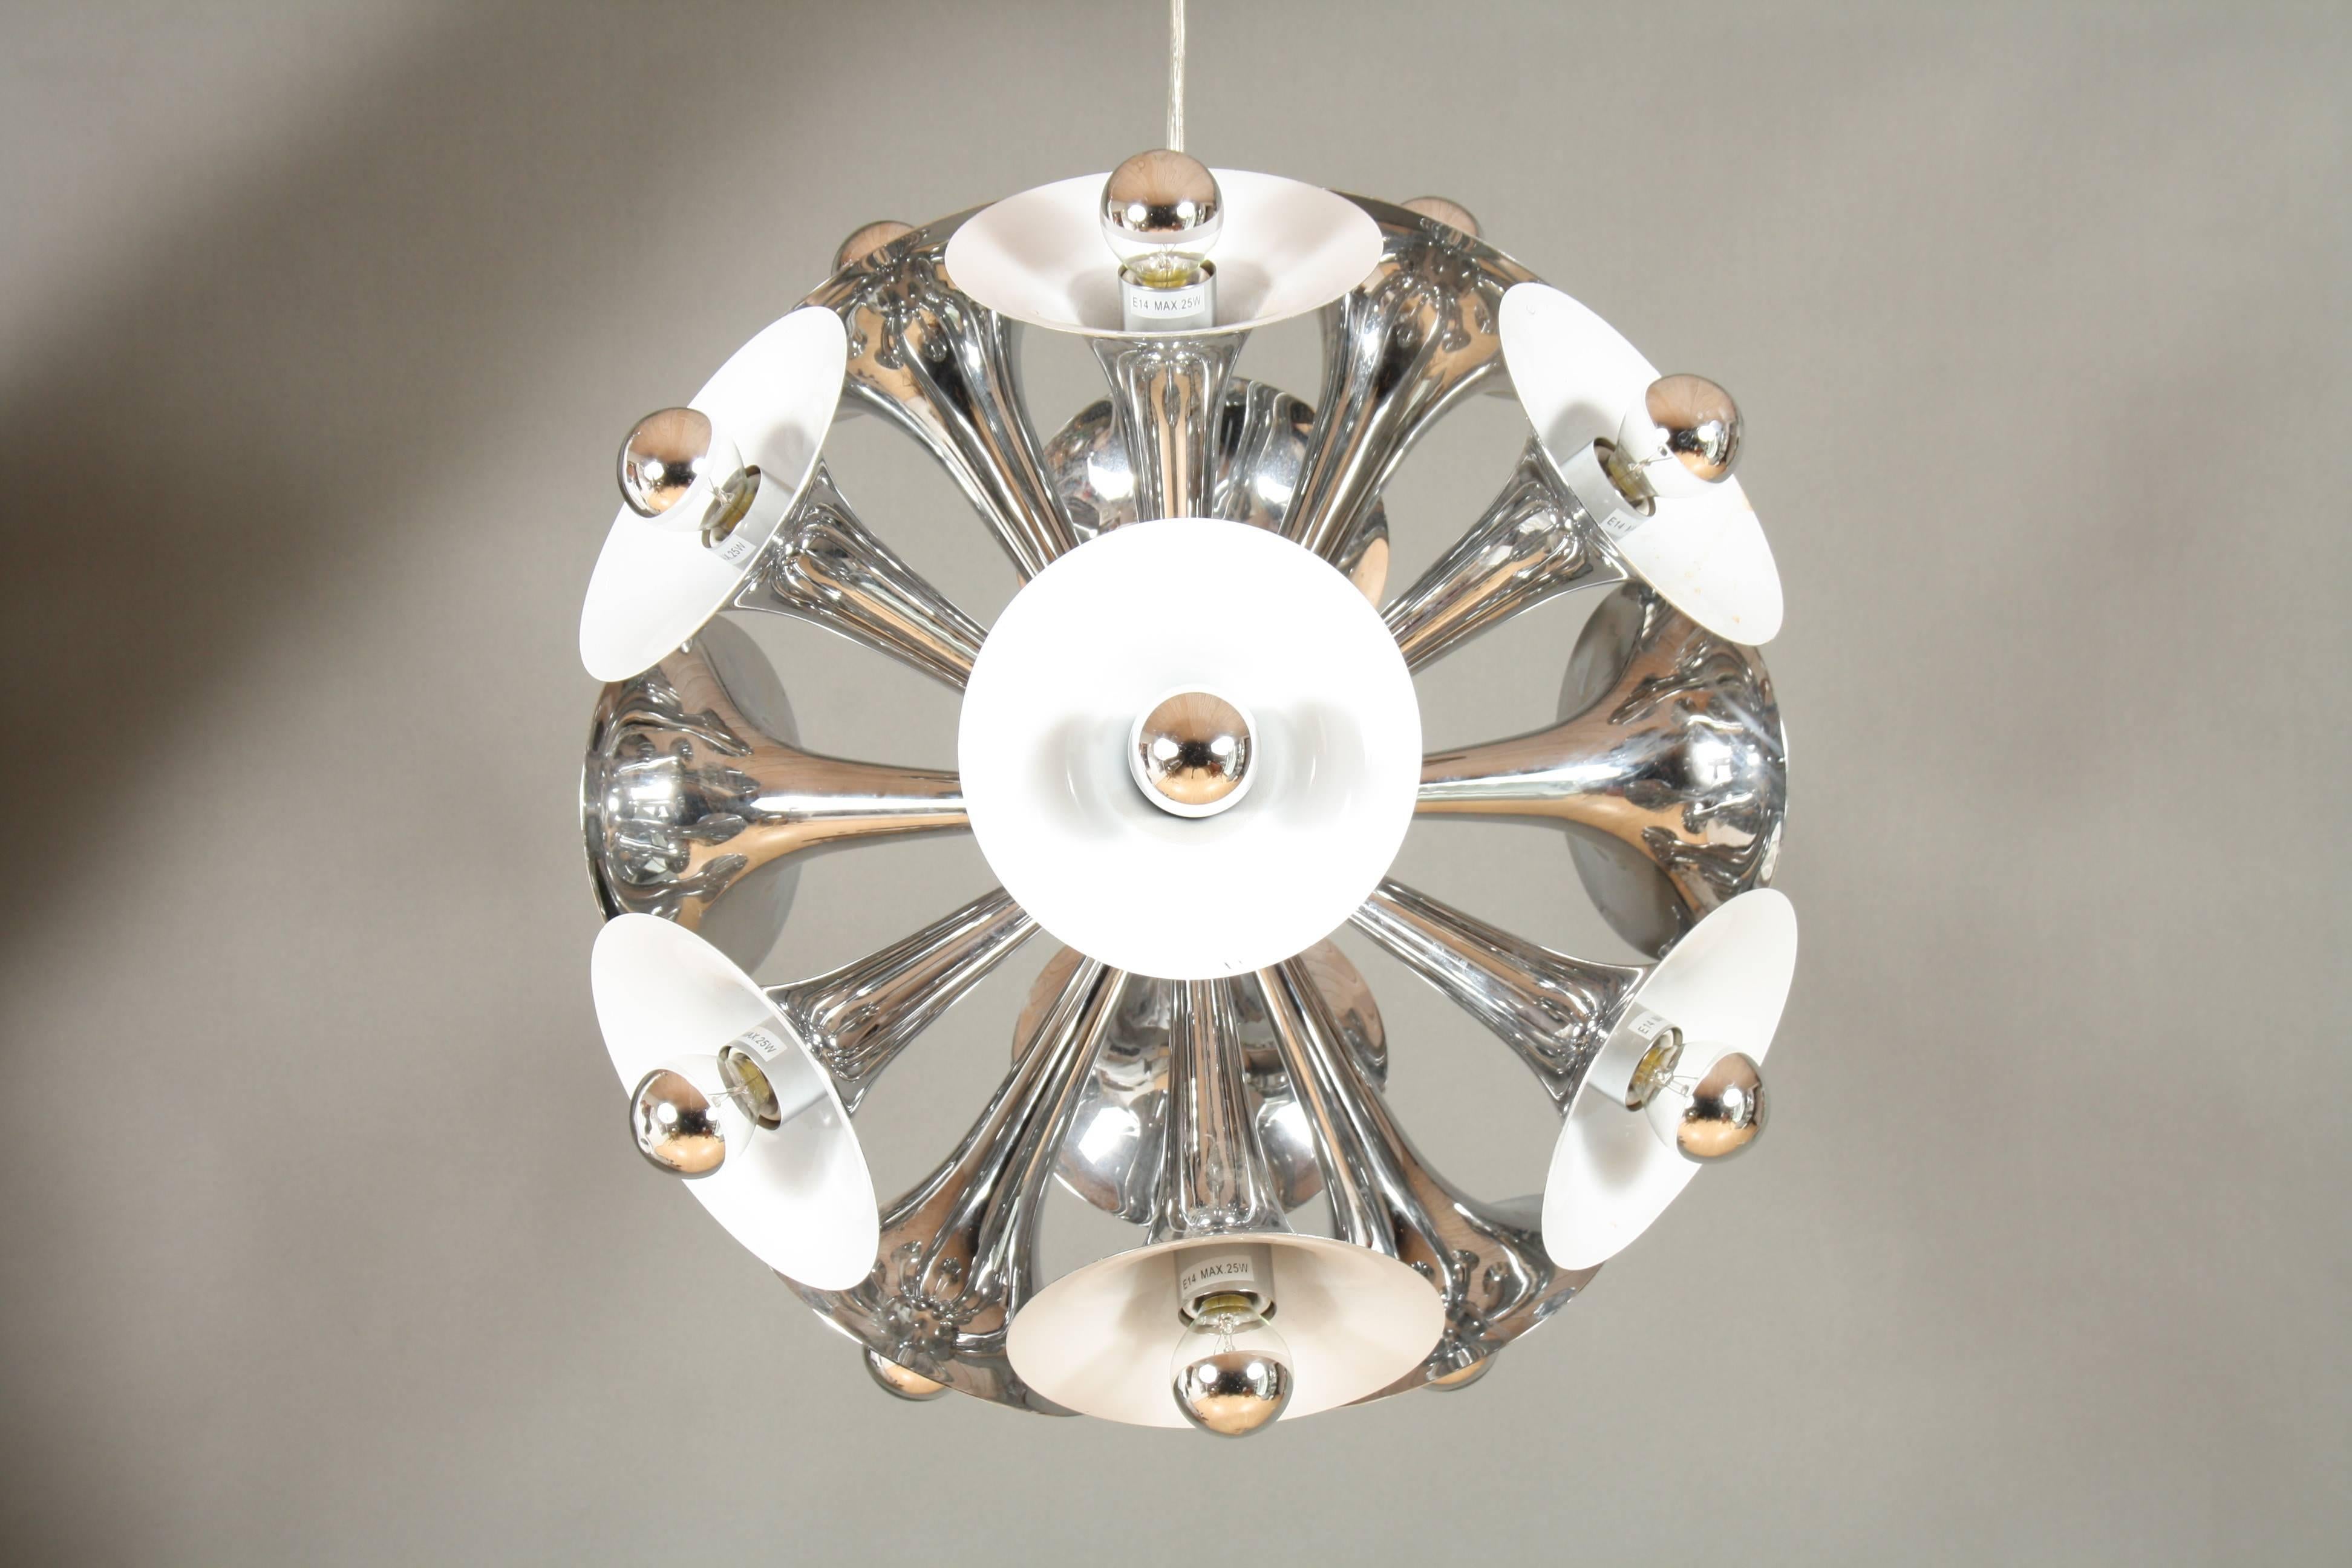 Very nice chrome Sputnik trumpet chandelier.
From the centre globe 15 trumpet-shaped shades stretch out creating a perfect sphere.
One of the upper trumpets has a small spot, but it's not visible.